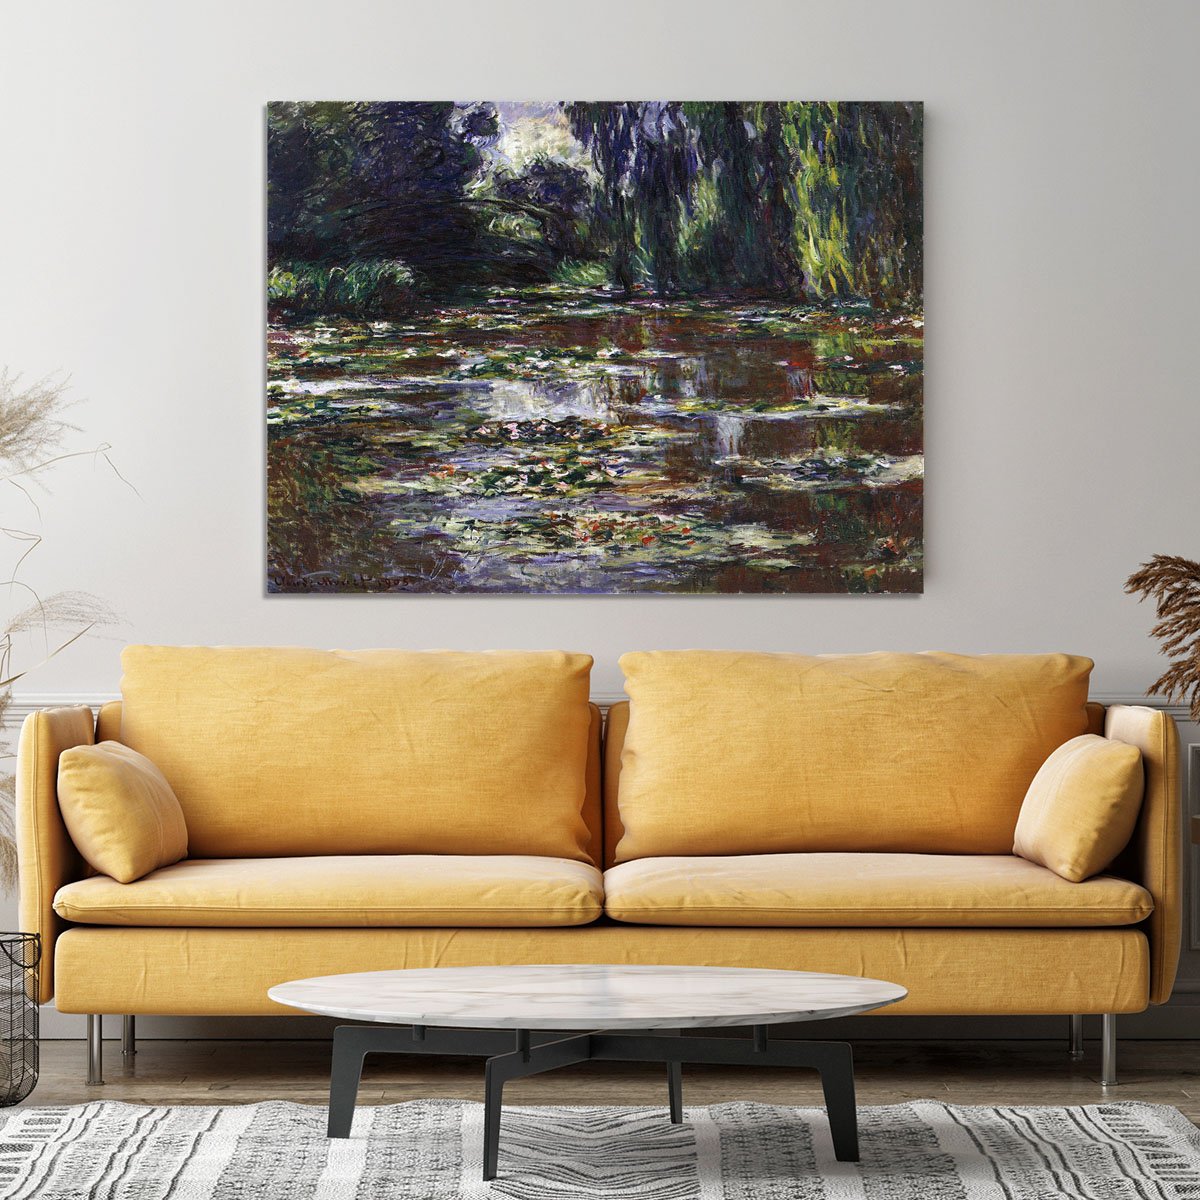 Water lilies water landscape 3 by Monet Canvas Print or Poster